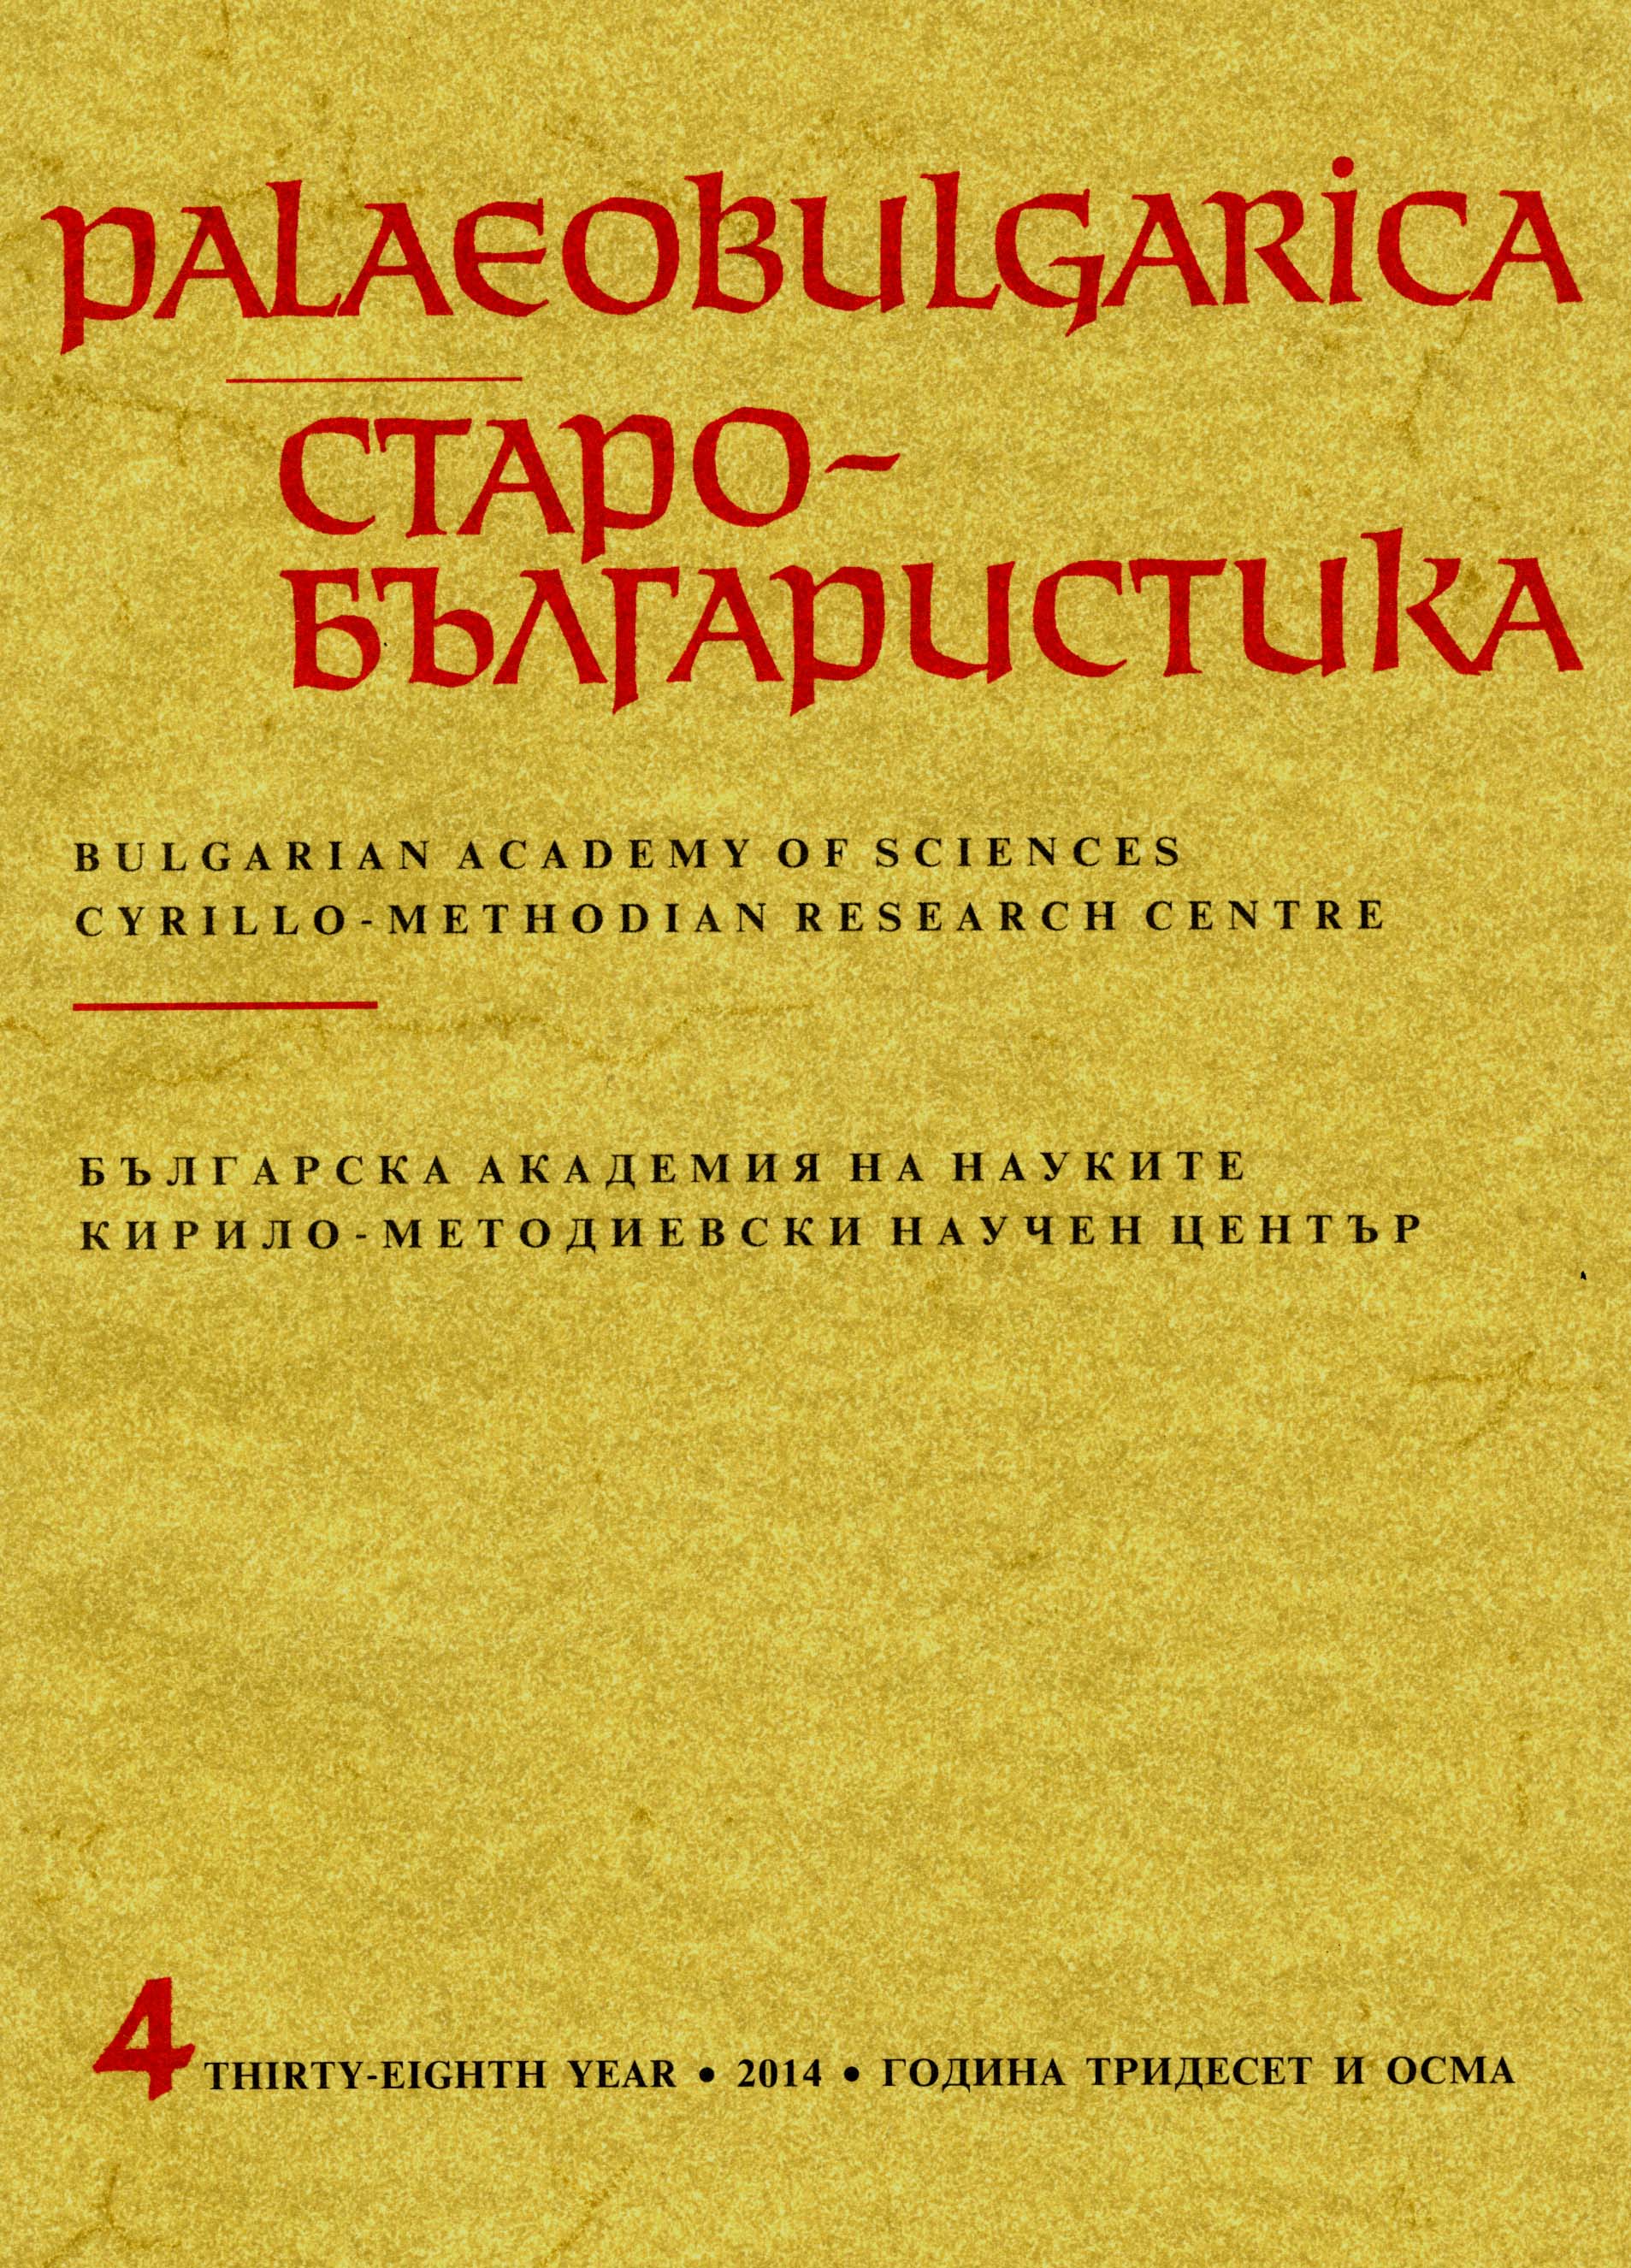 The Slavic Mediaeval Written Heritage and Information Technologies Cover Image